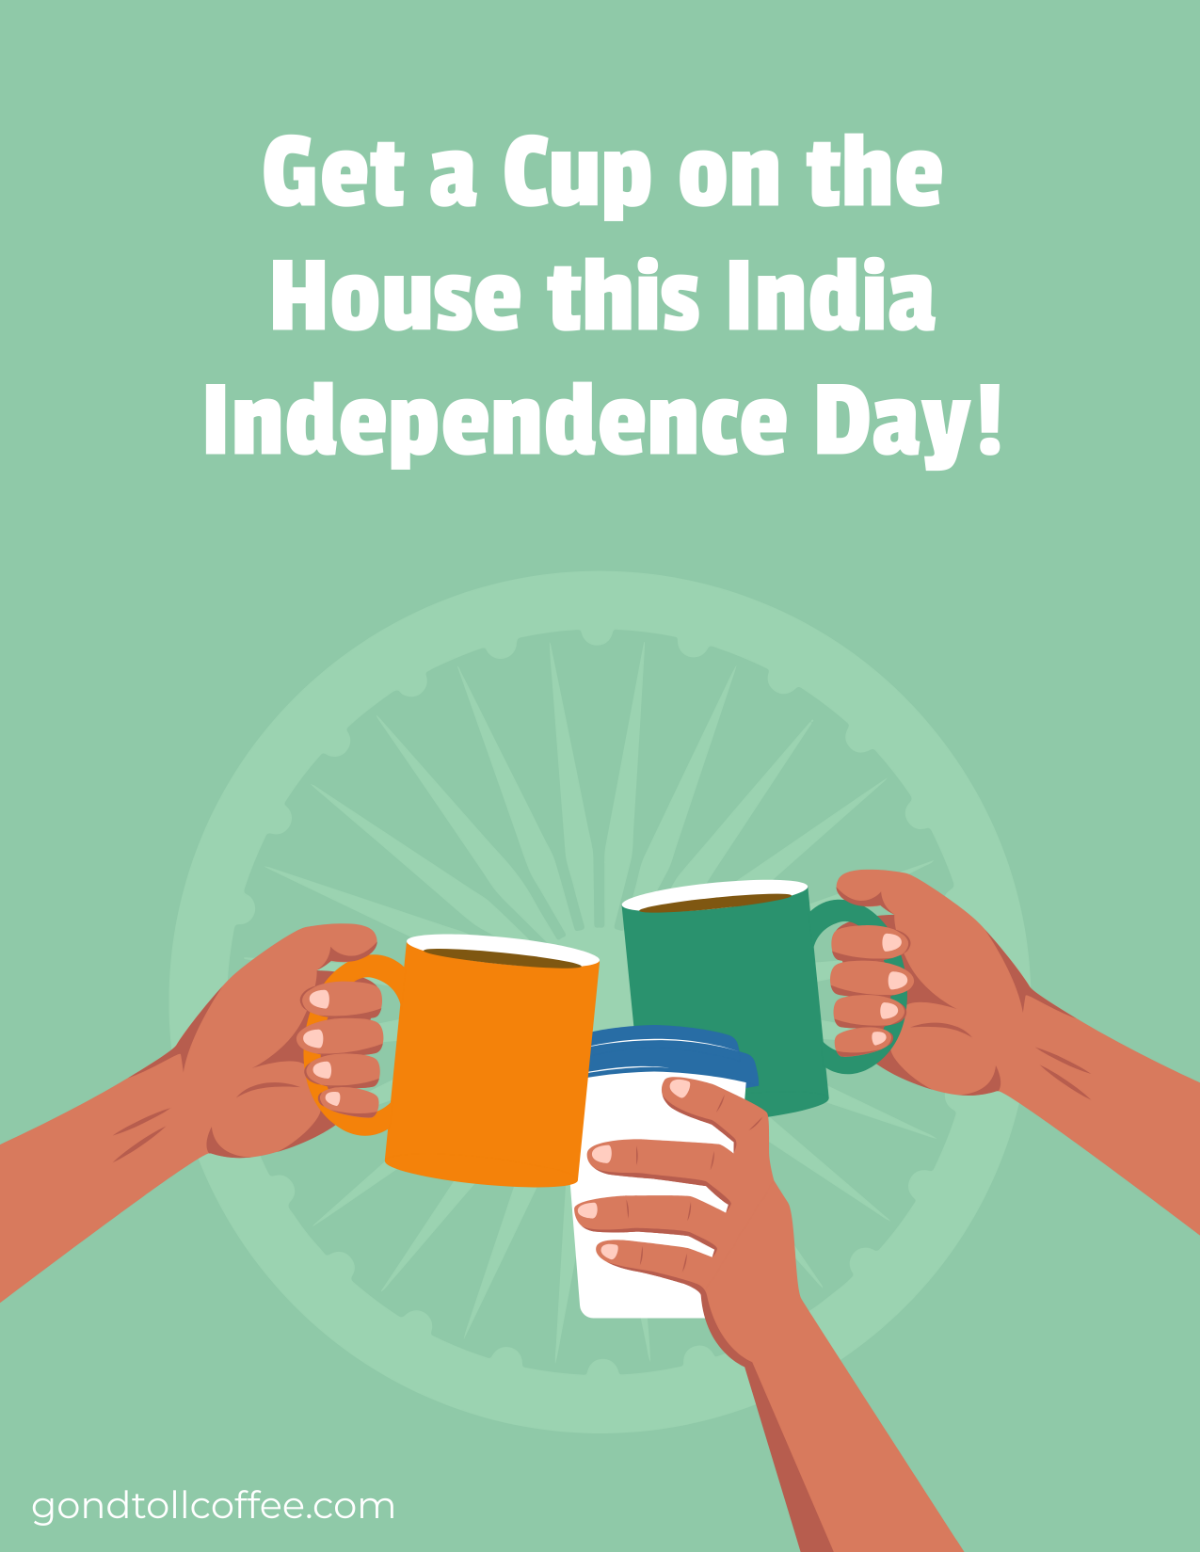 India Independence Day Sales Promotion